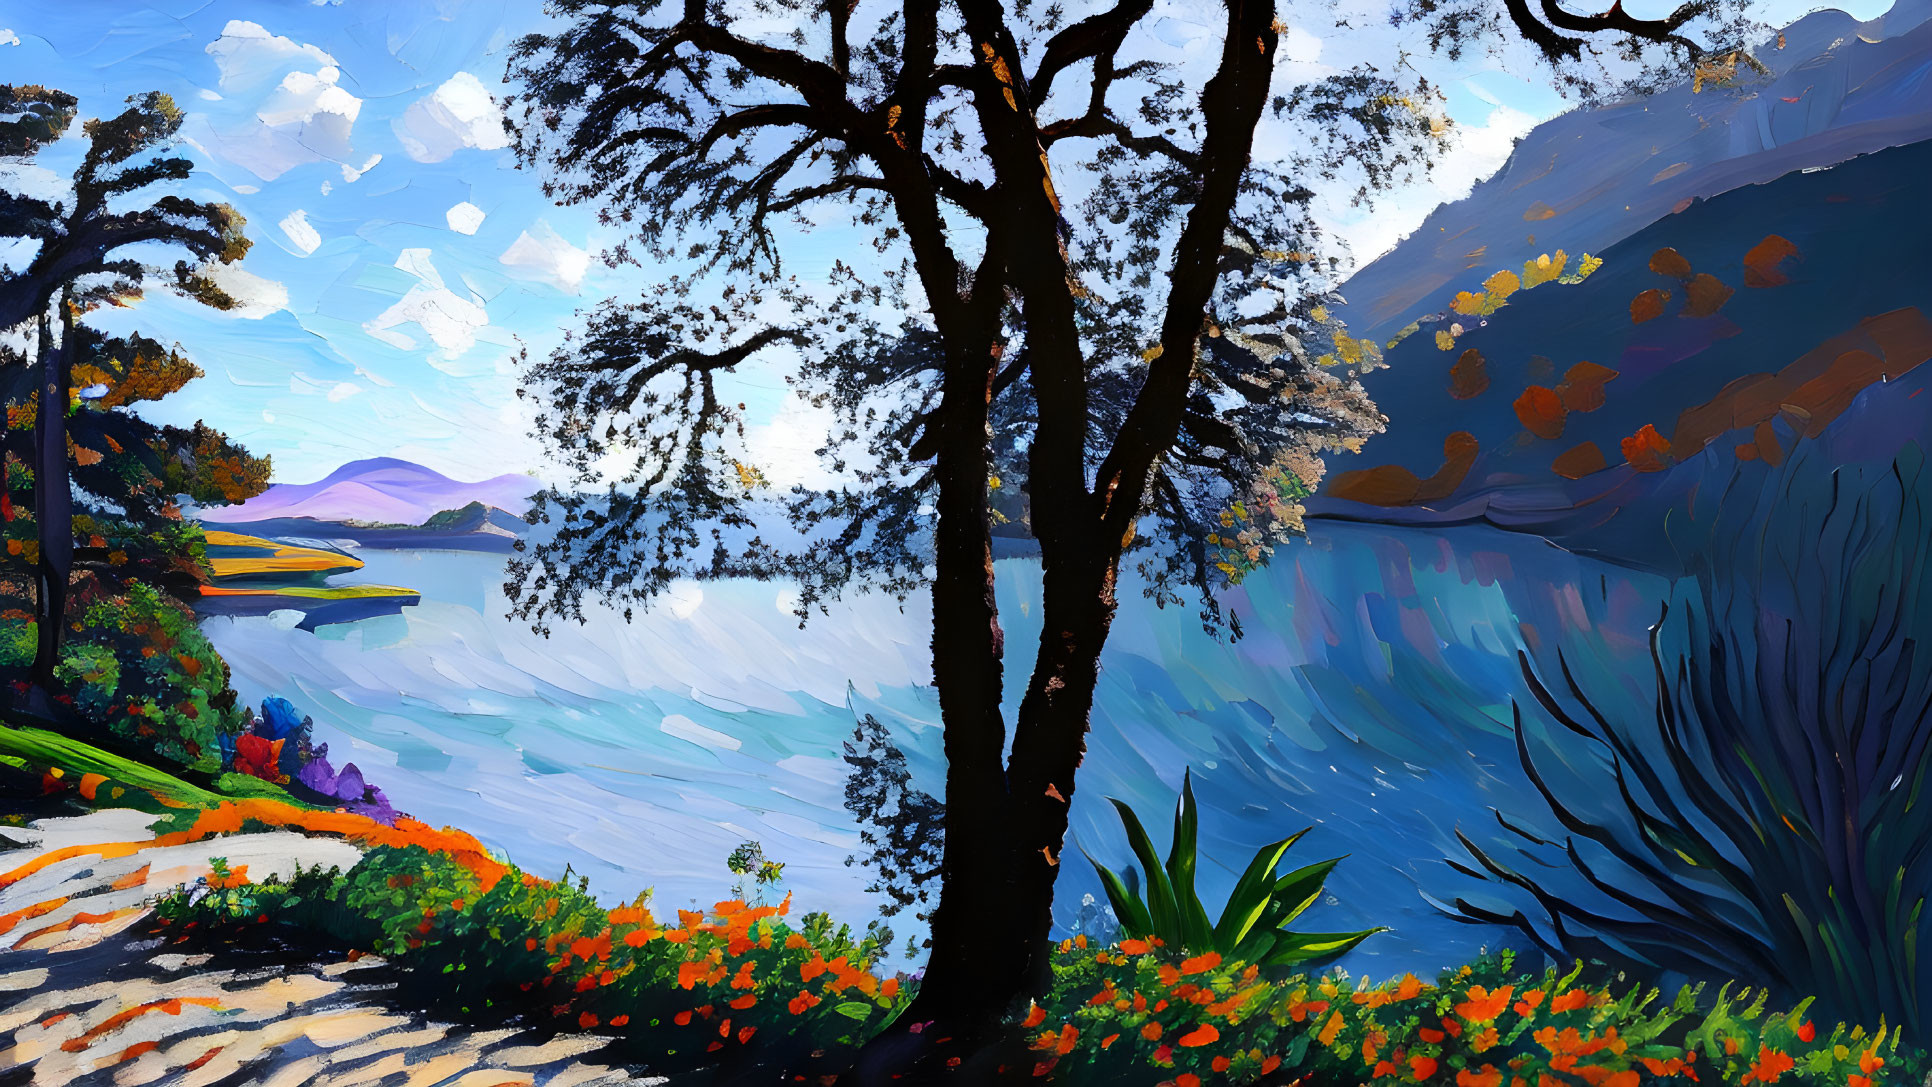 Scenic lakeside painting with vibrant colors